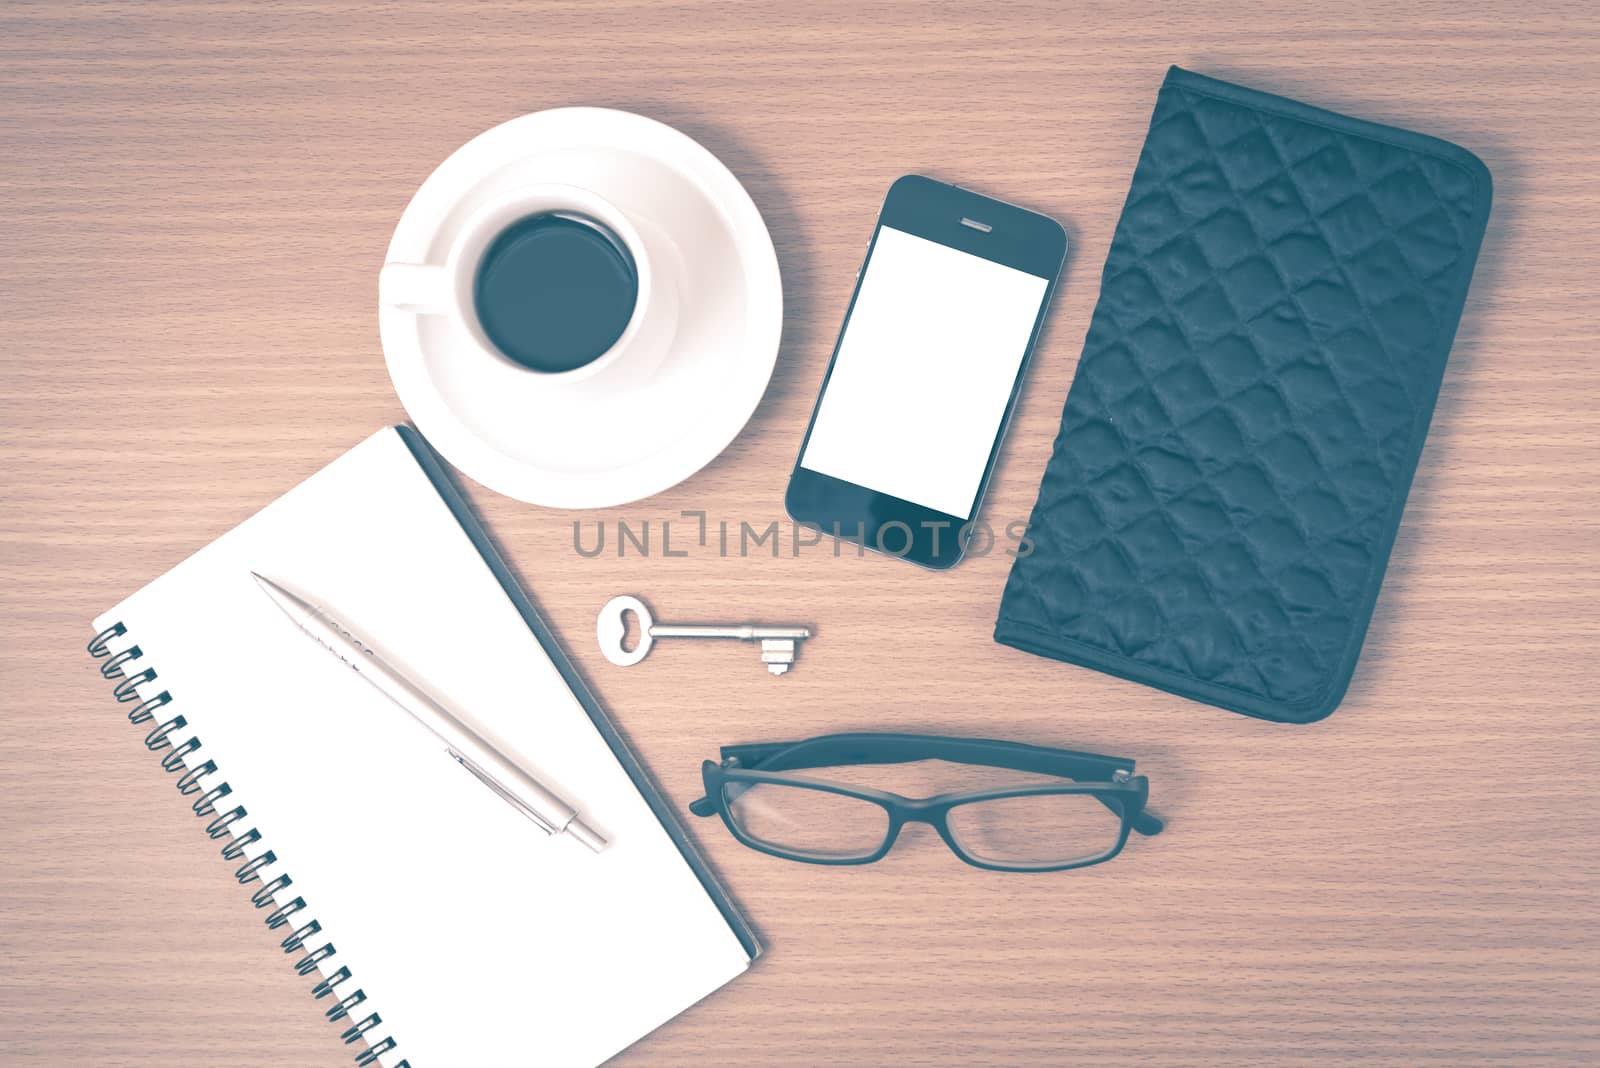 coffee and phone with notepad,key,eyeglasses and wallet on wood table background vintage style